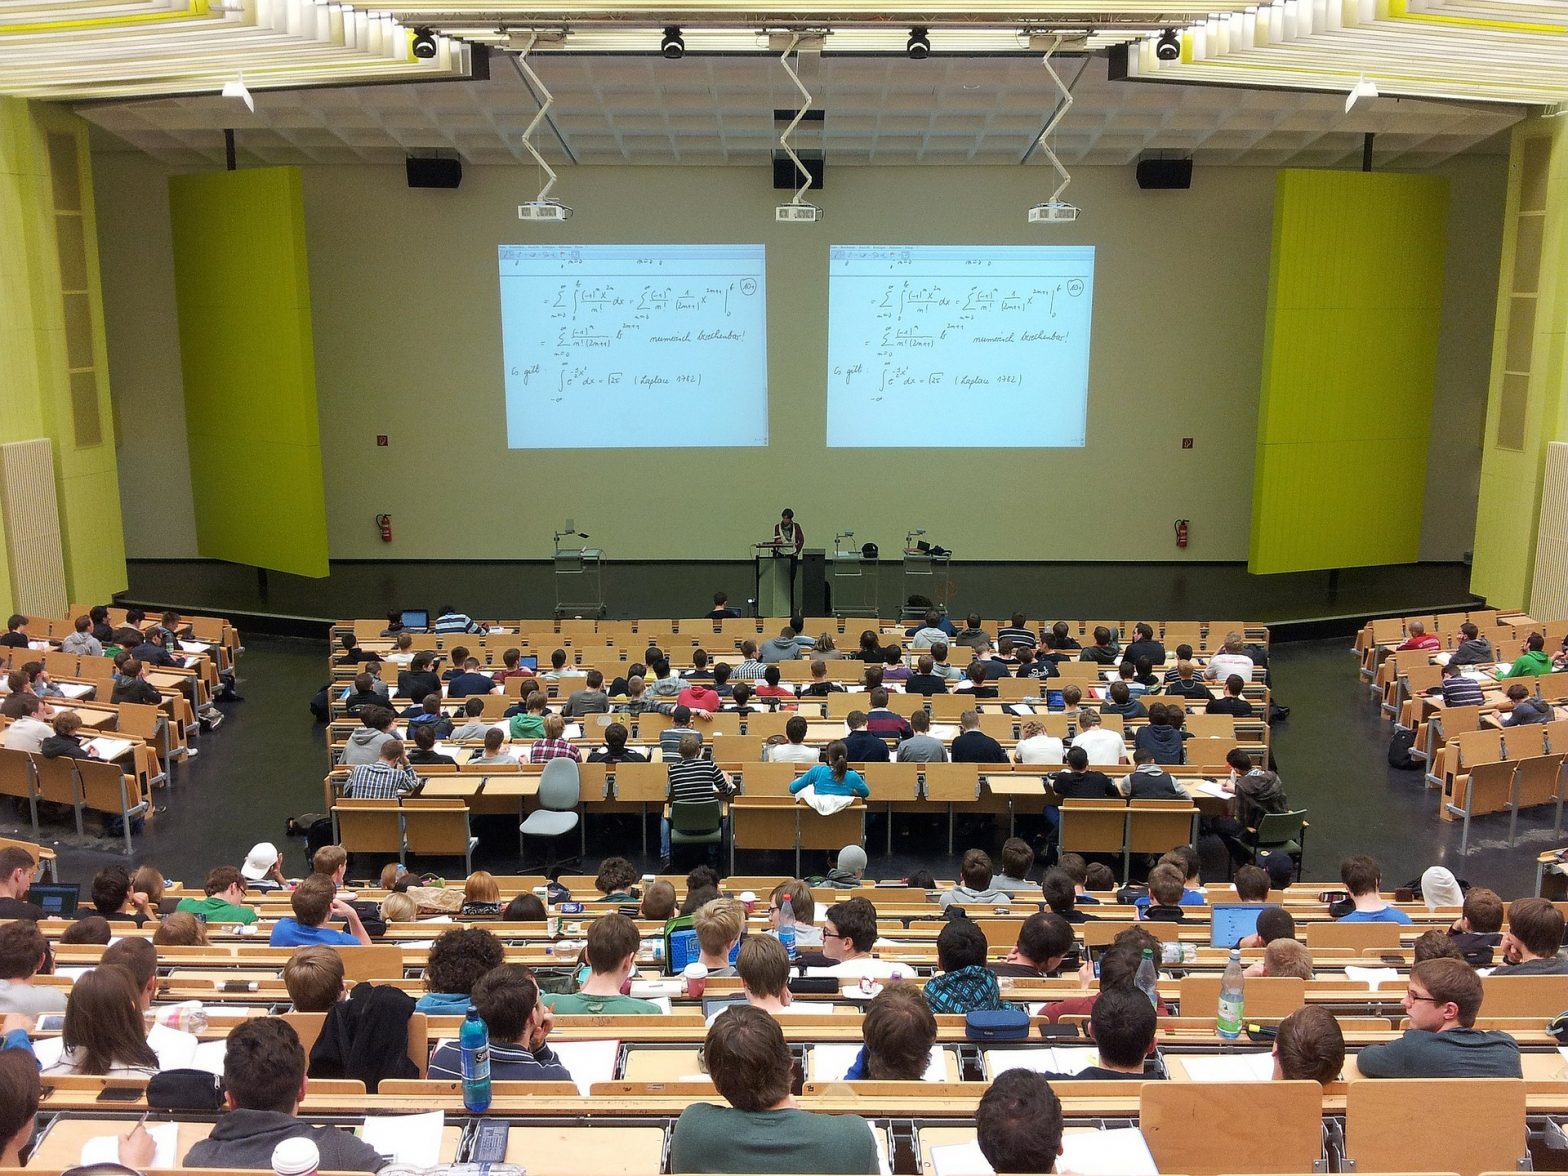 university lecture theatre showing students seated throughout theatre facing a lecturer with a large screen behind covered in equations